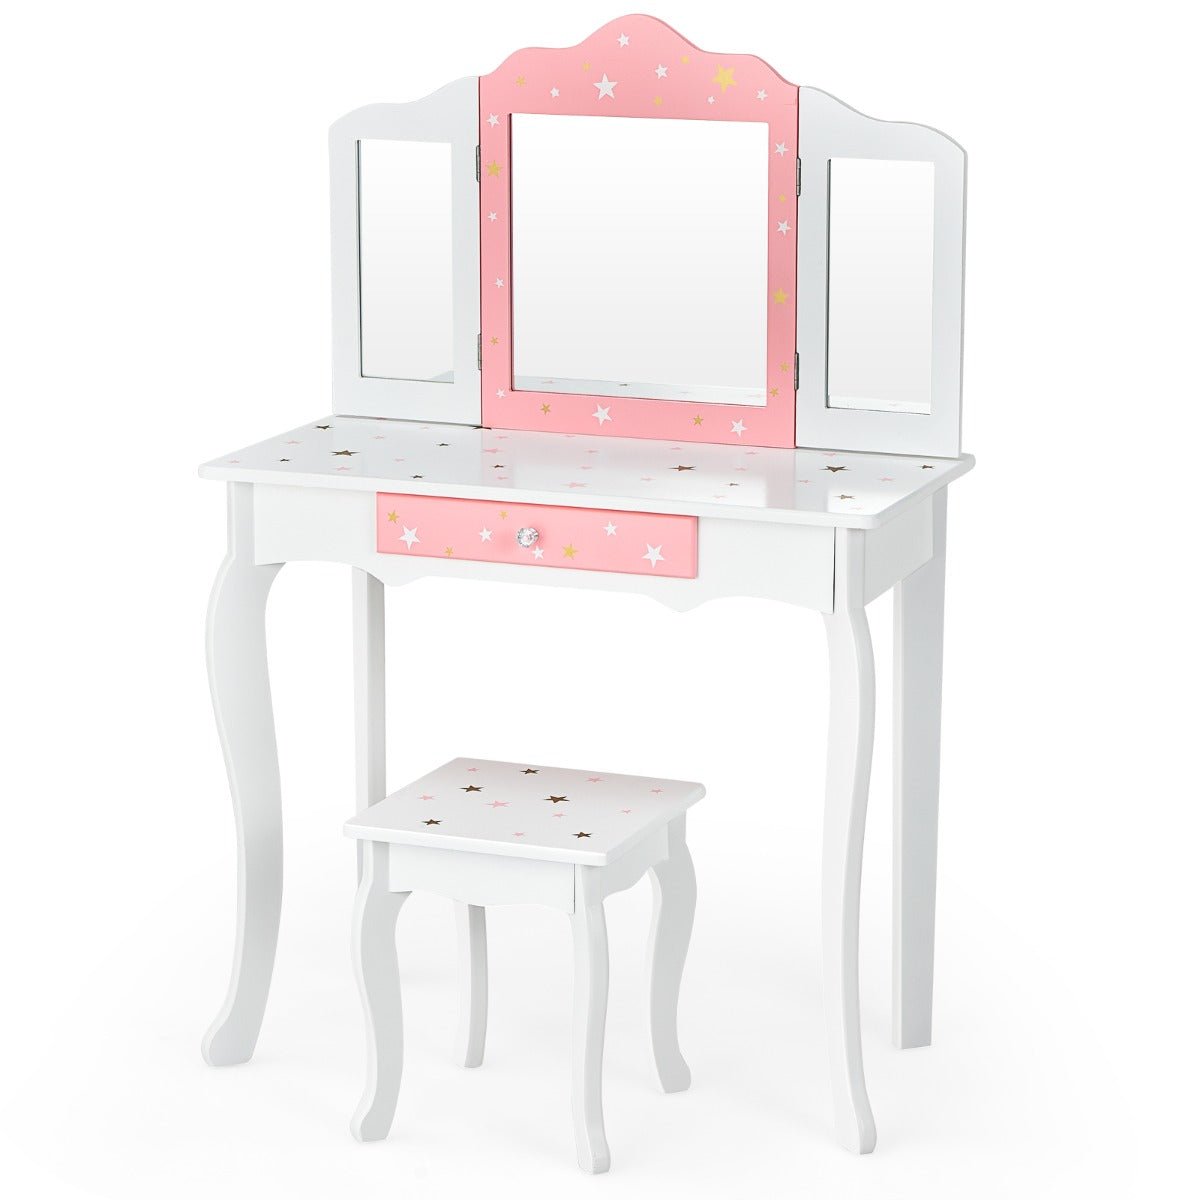 Children's Makeup Table & Chair Set - Tri-Fold Mirror Elegance for Bedrooms